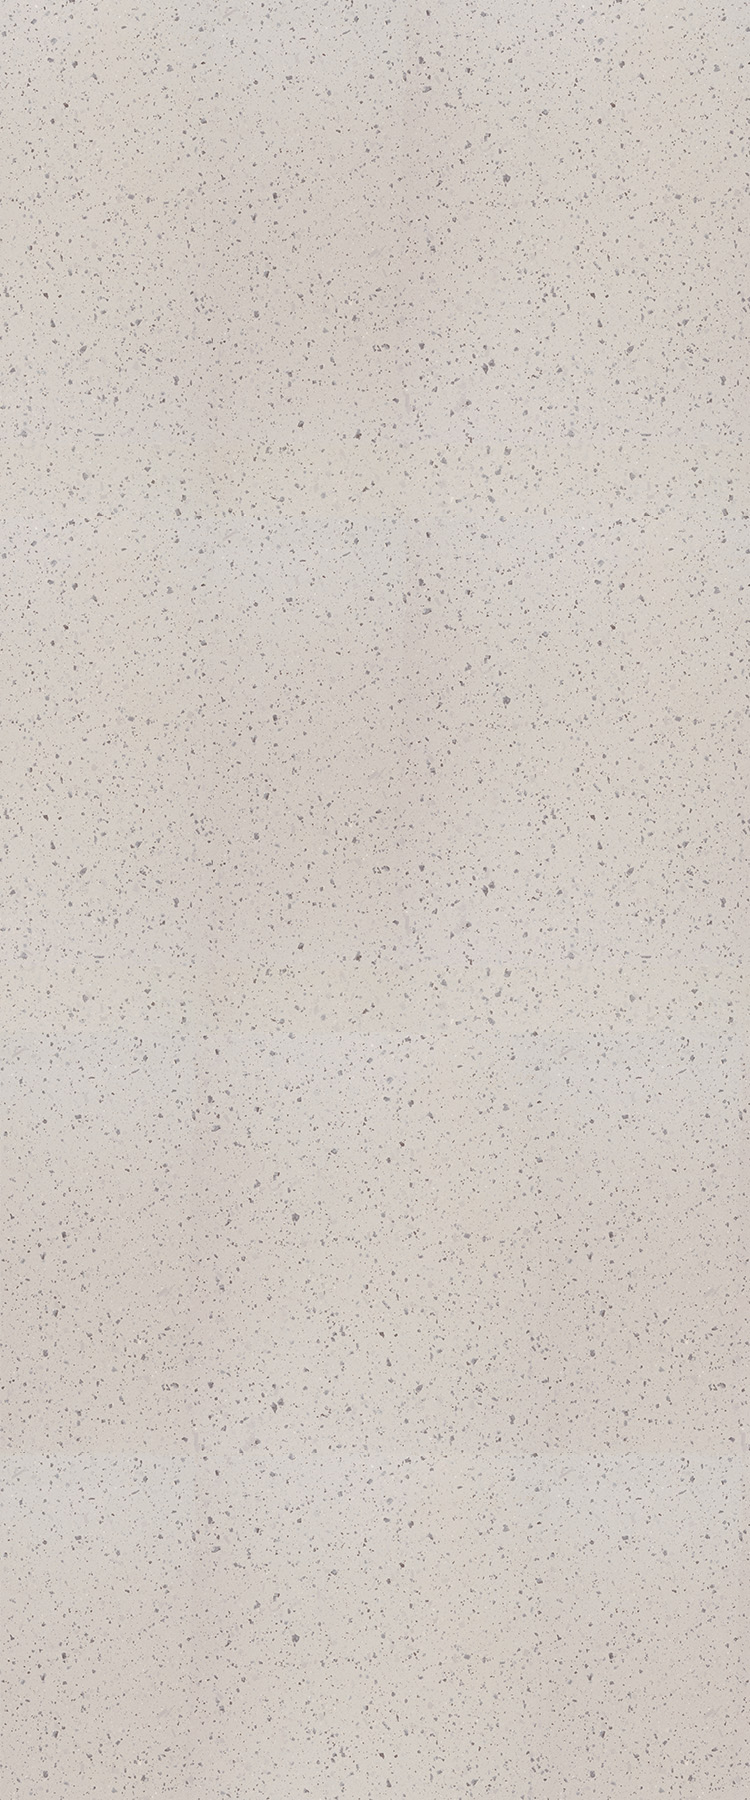 8812 Tinted Paper Terrazzo - Patterns & Pearlescent